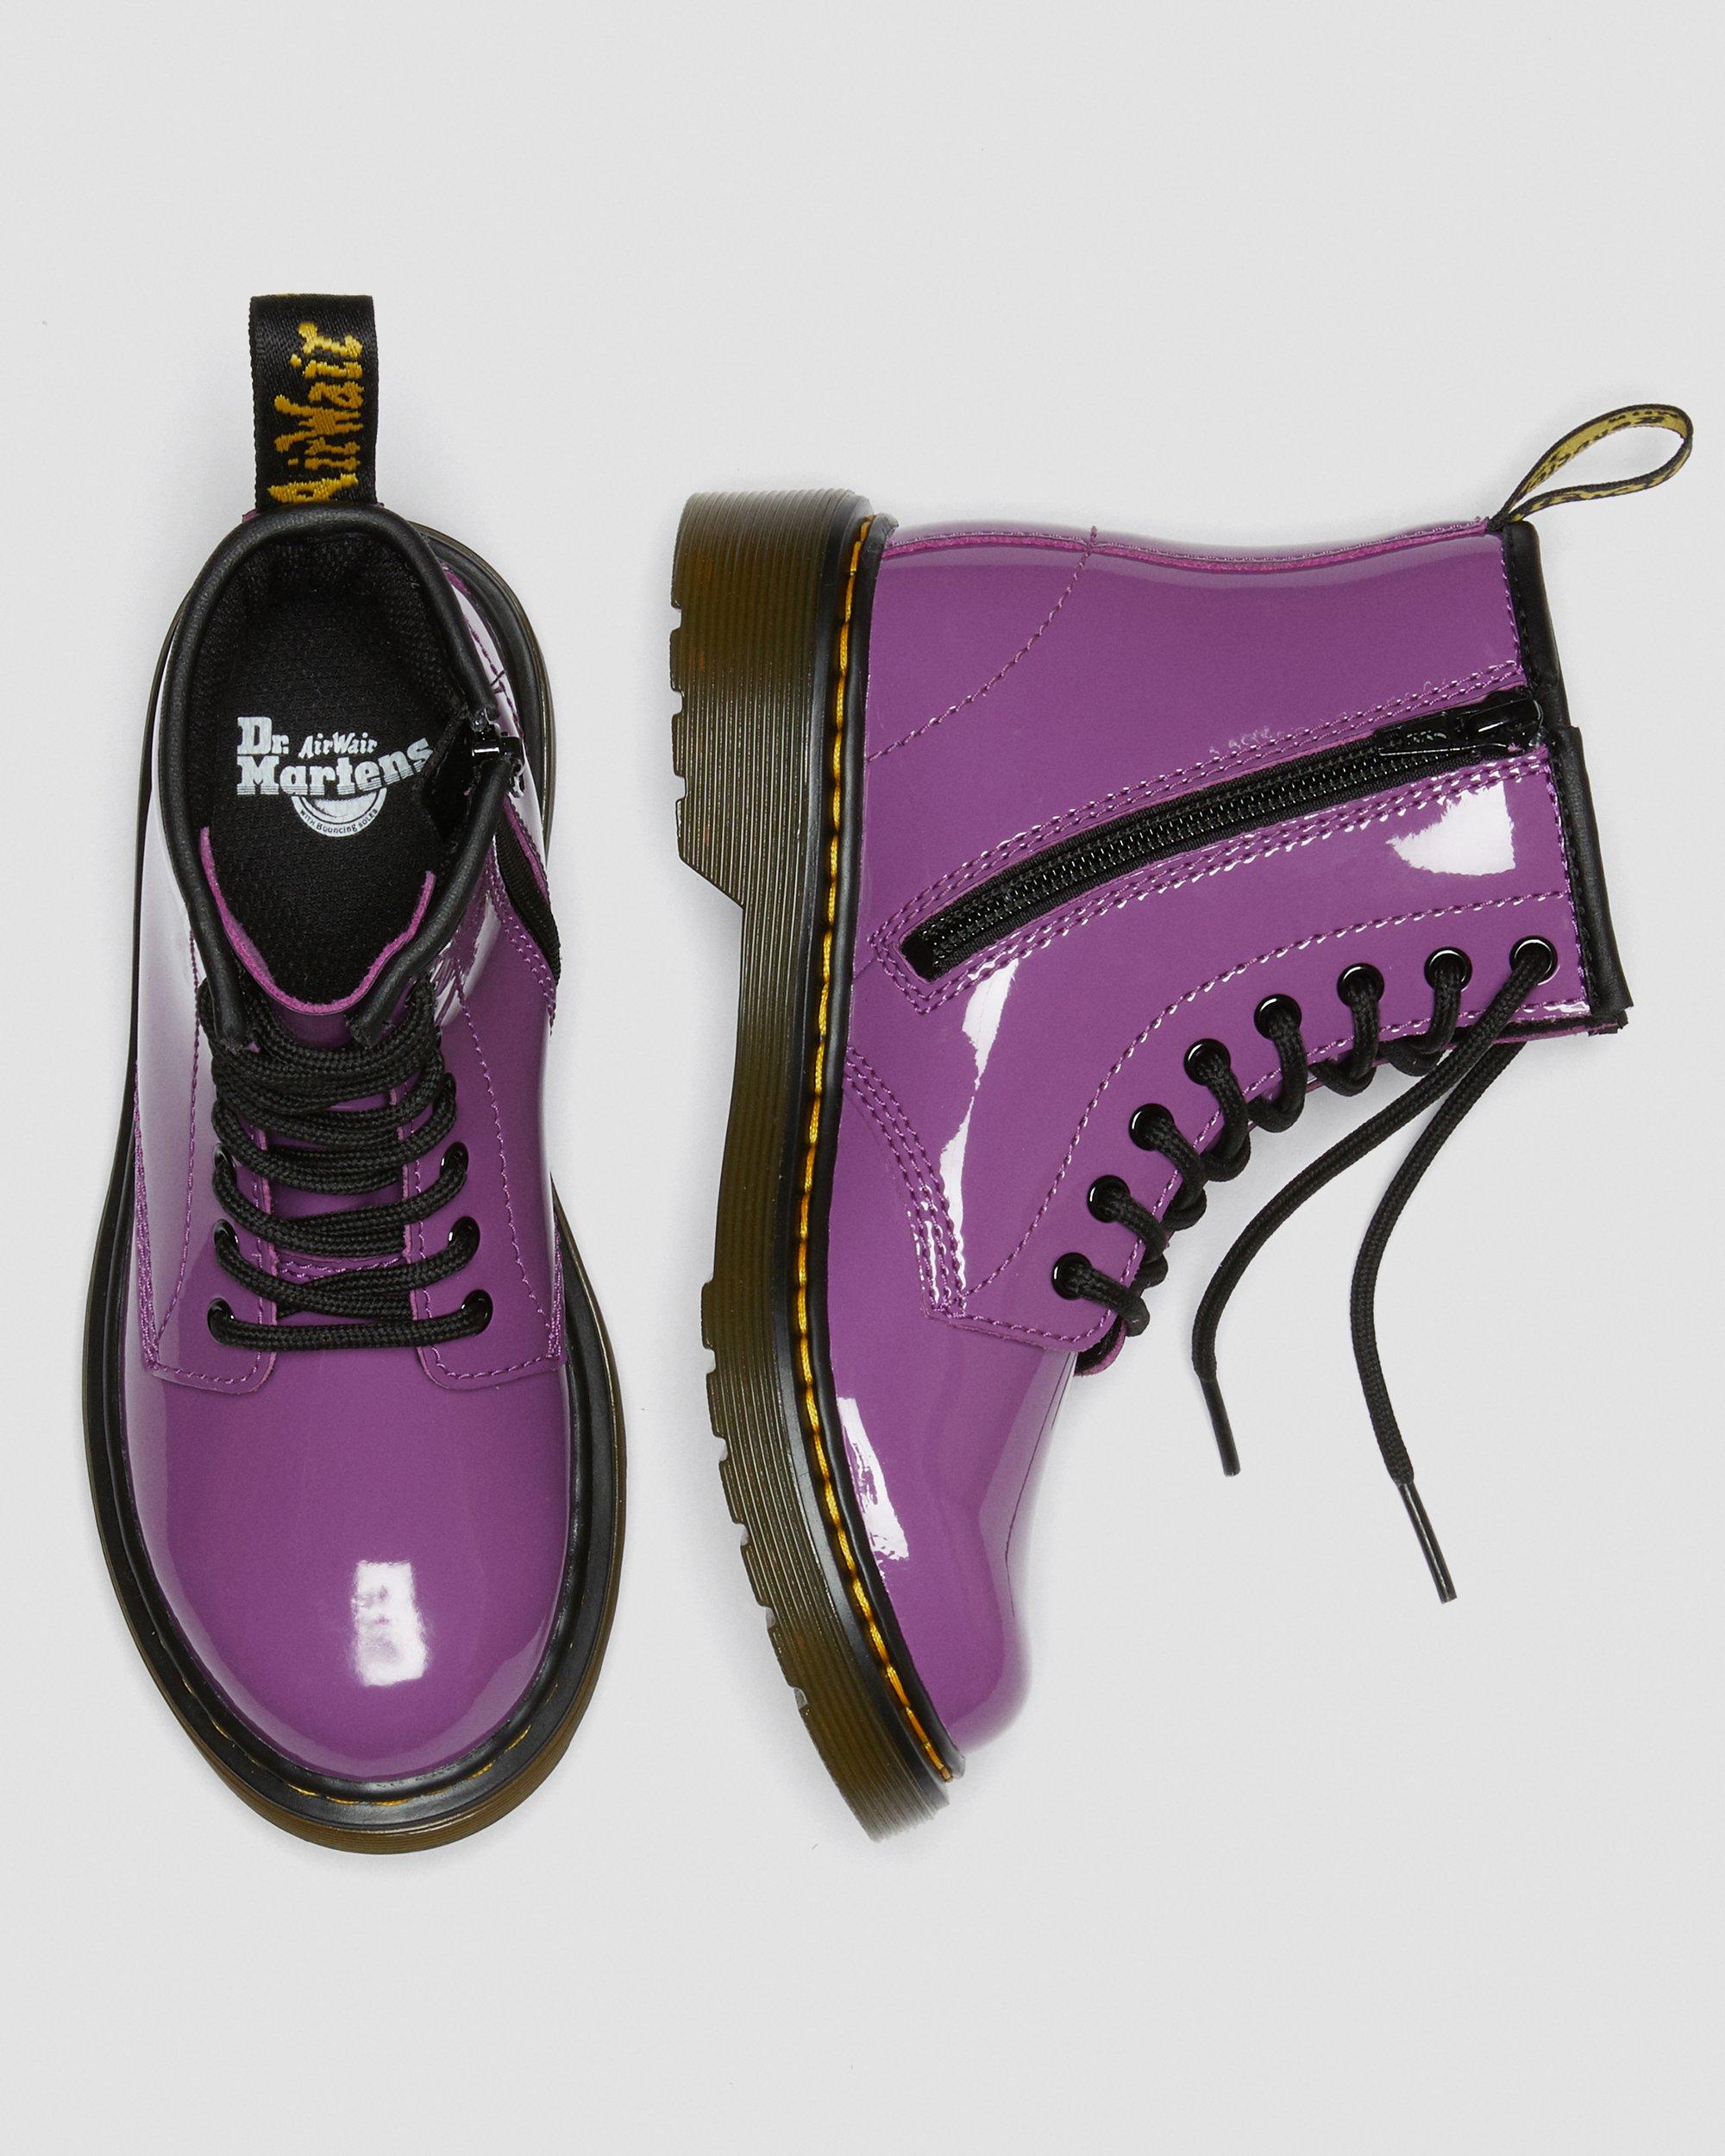 Junior 1460 Patent Leather Lace Up Boots in Purple | Dr. Martens